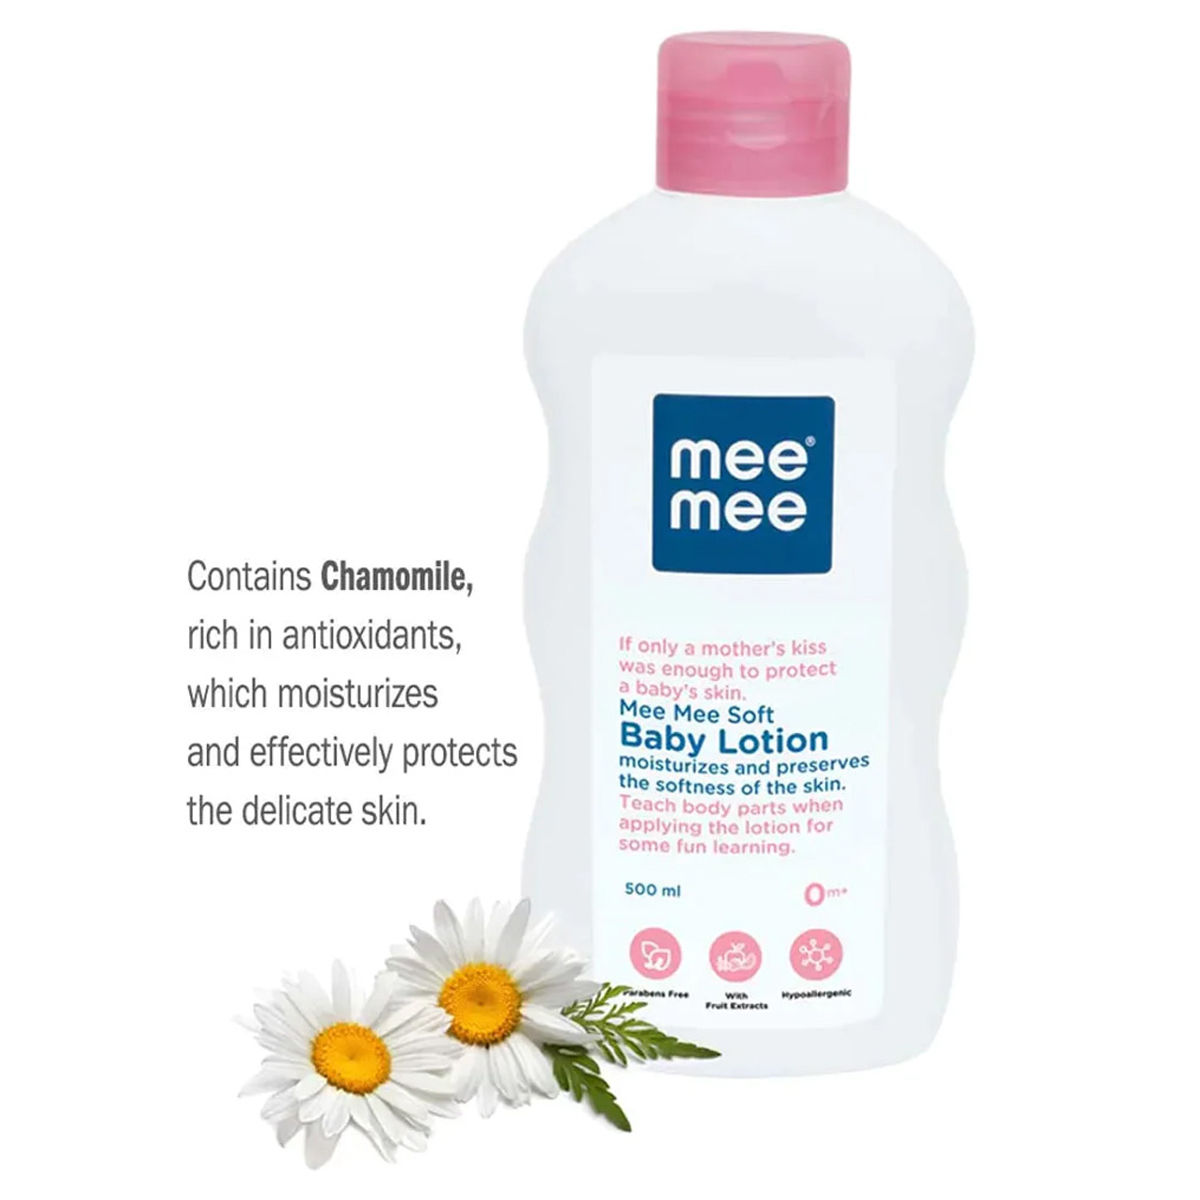 Mee Mee Soft Moisturizing Baby Lotion, 100 ml, Pack of 1 